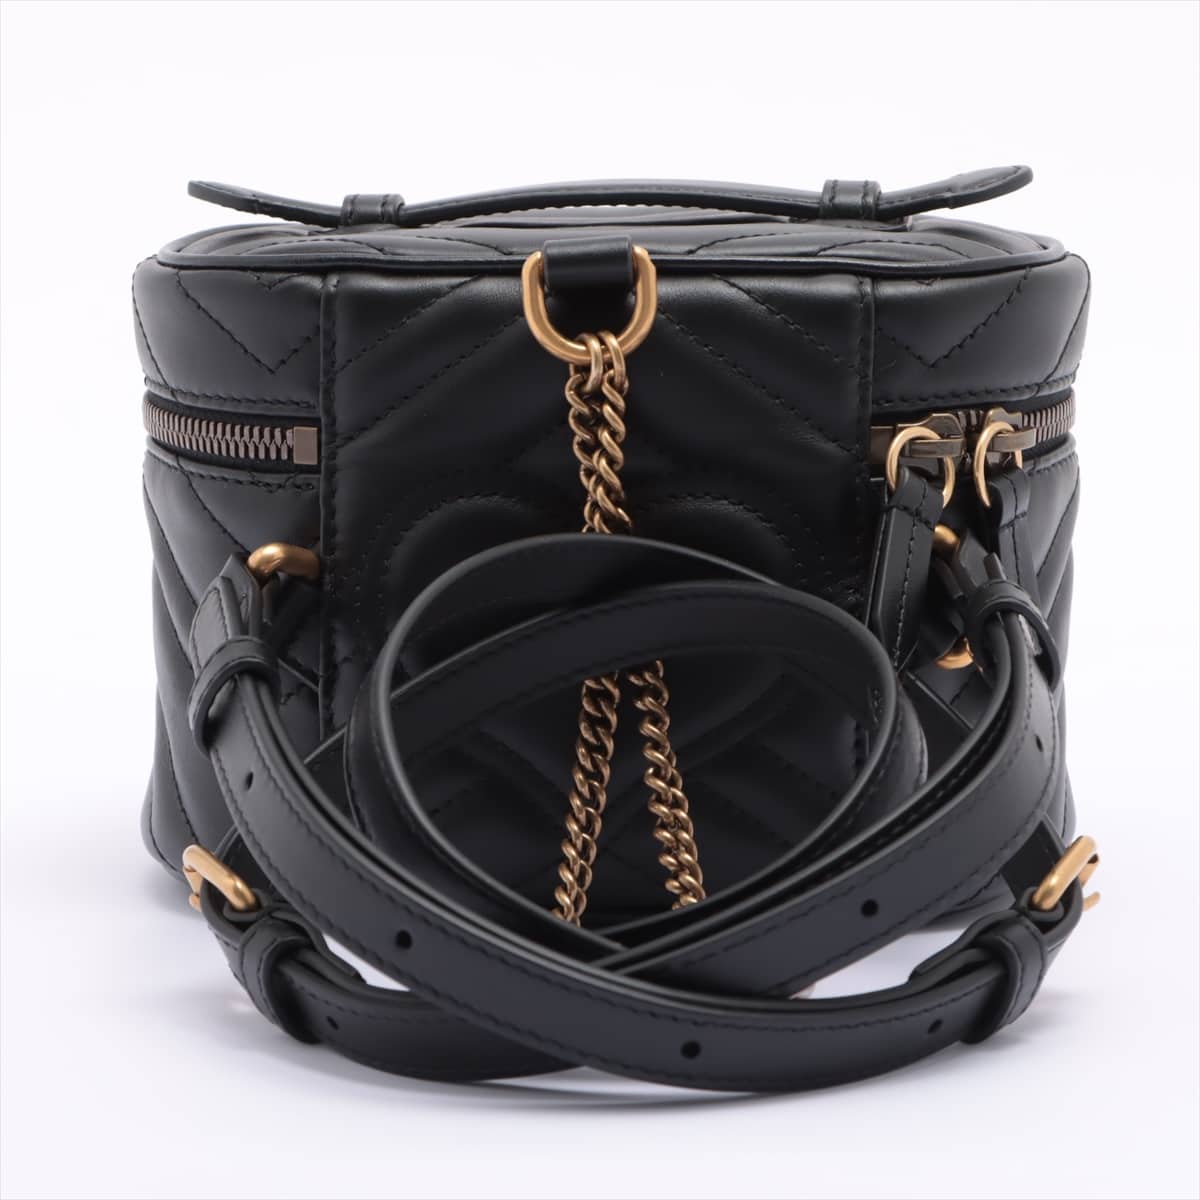 Gucci GG Marmont Leather Backpack Black 598594